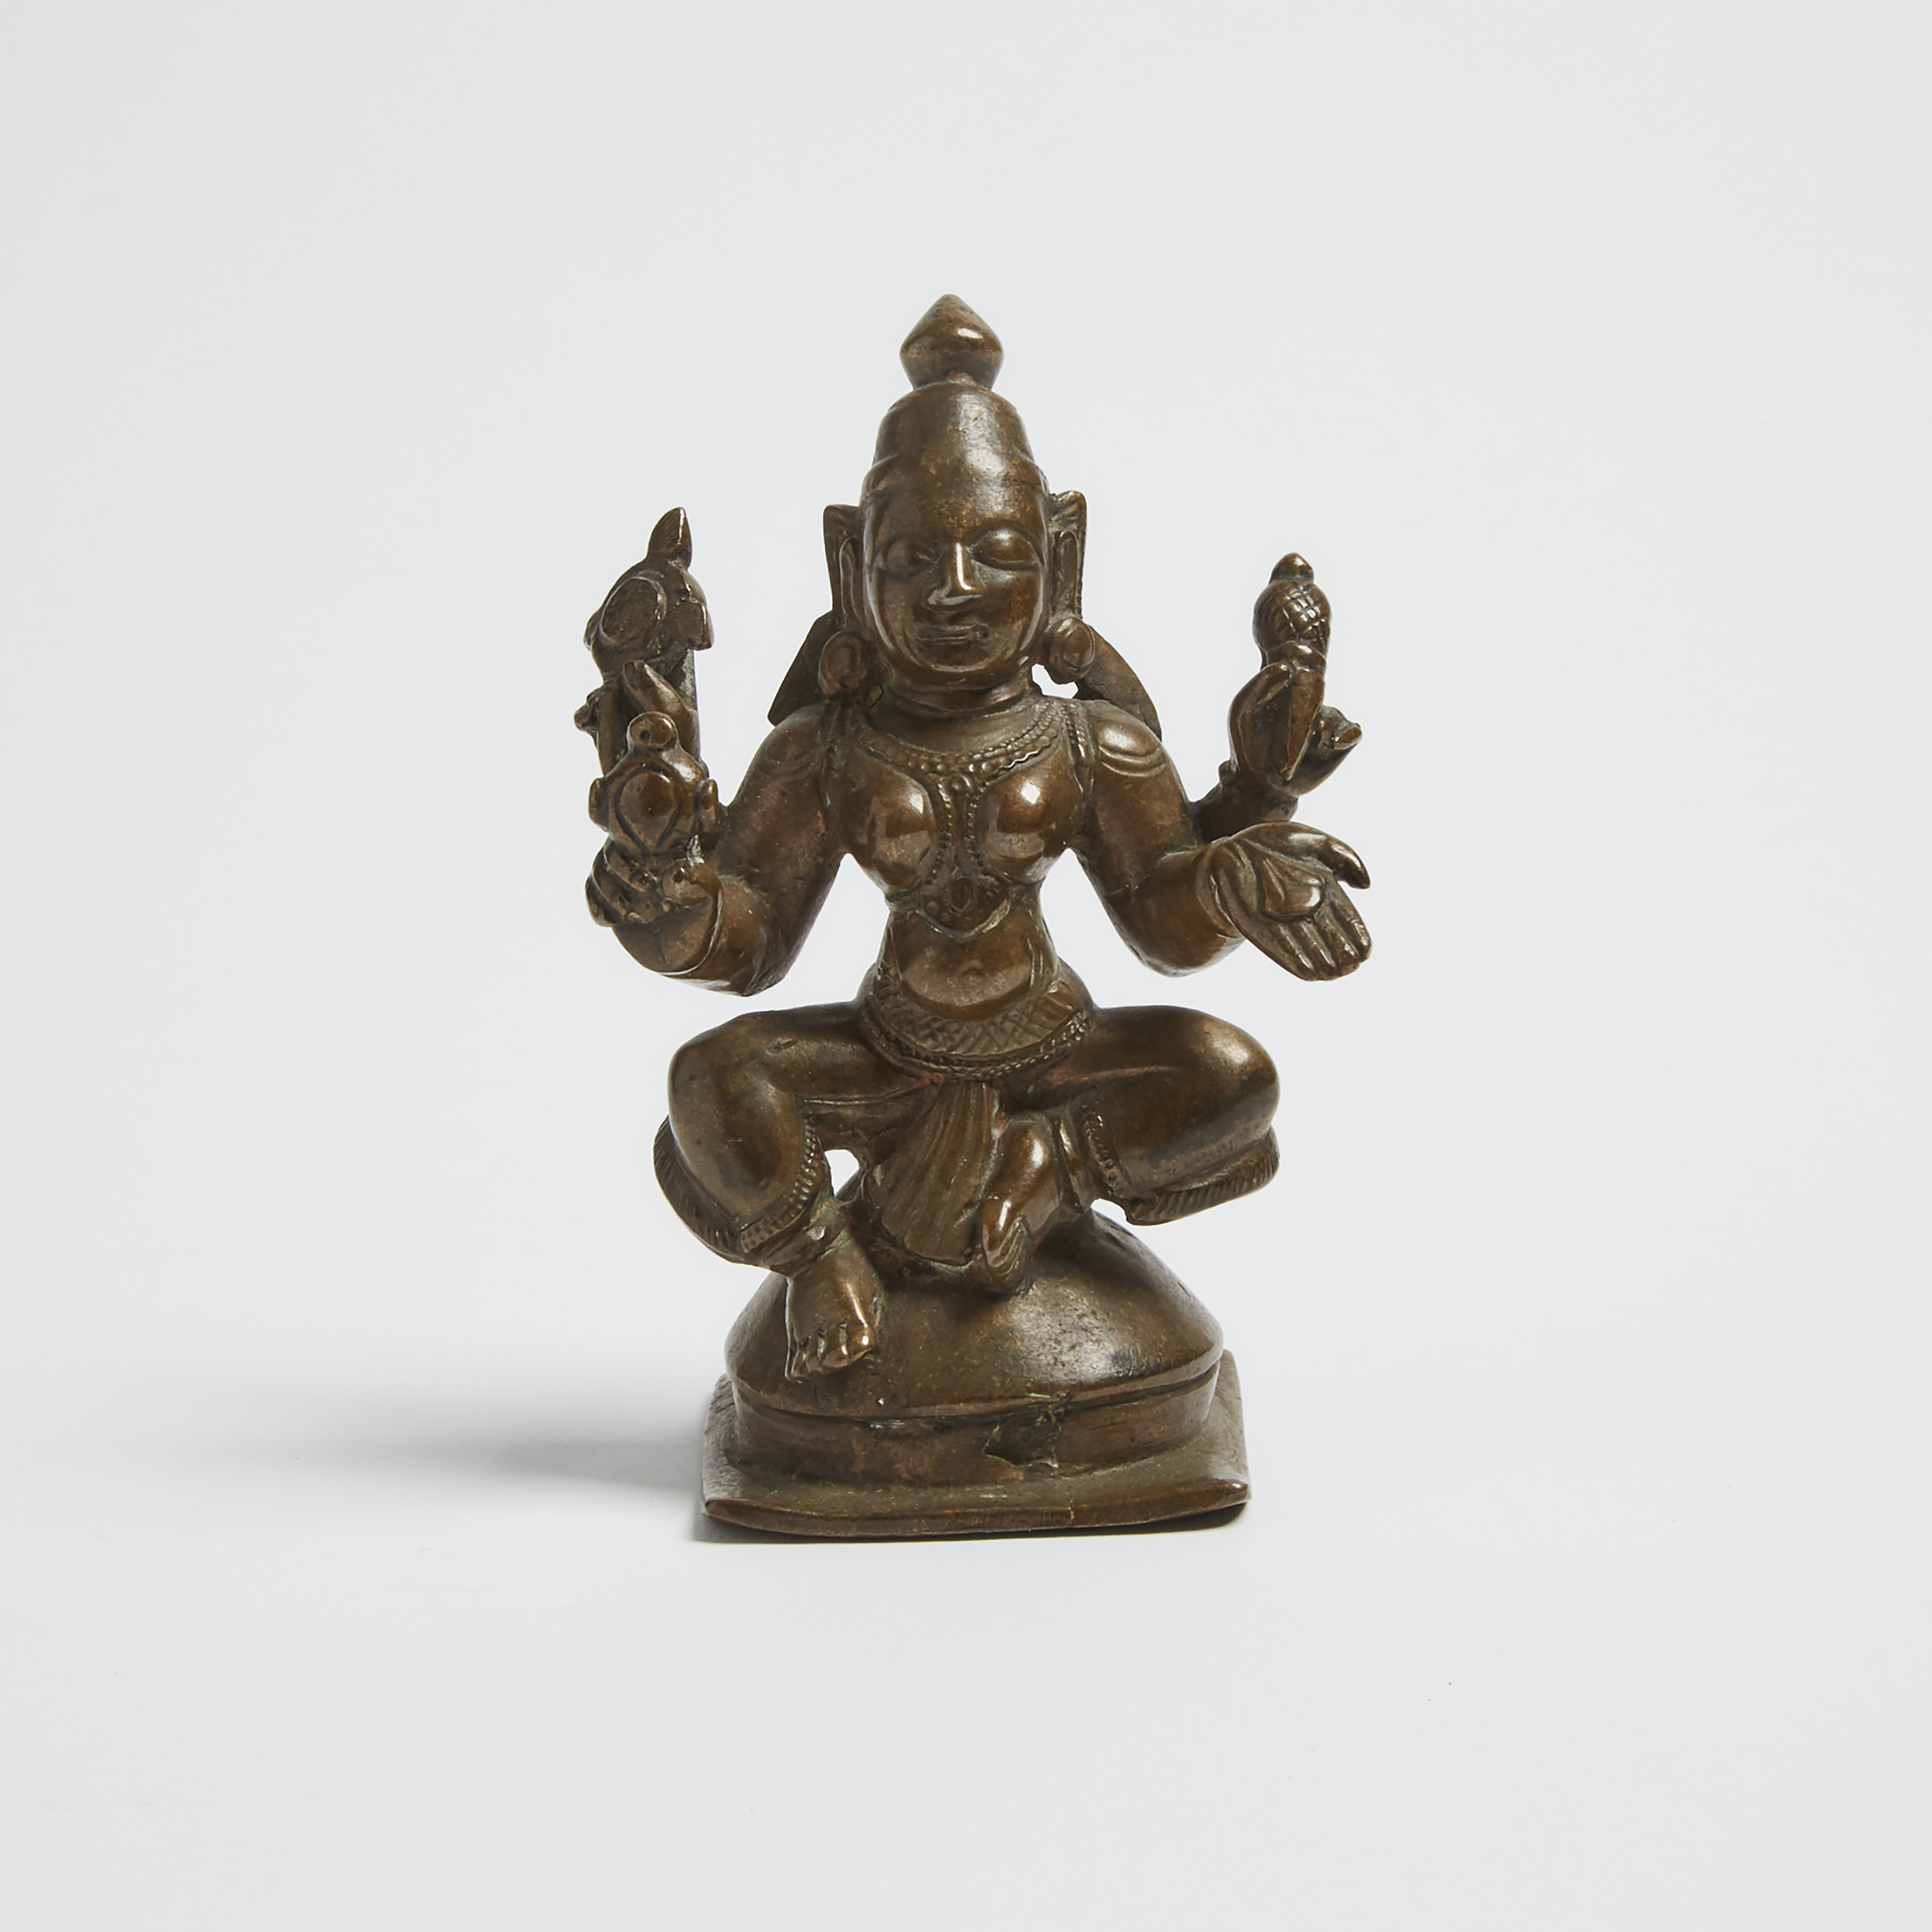 Auction - Asian Art at 05.12.2019 - LotSearch